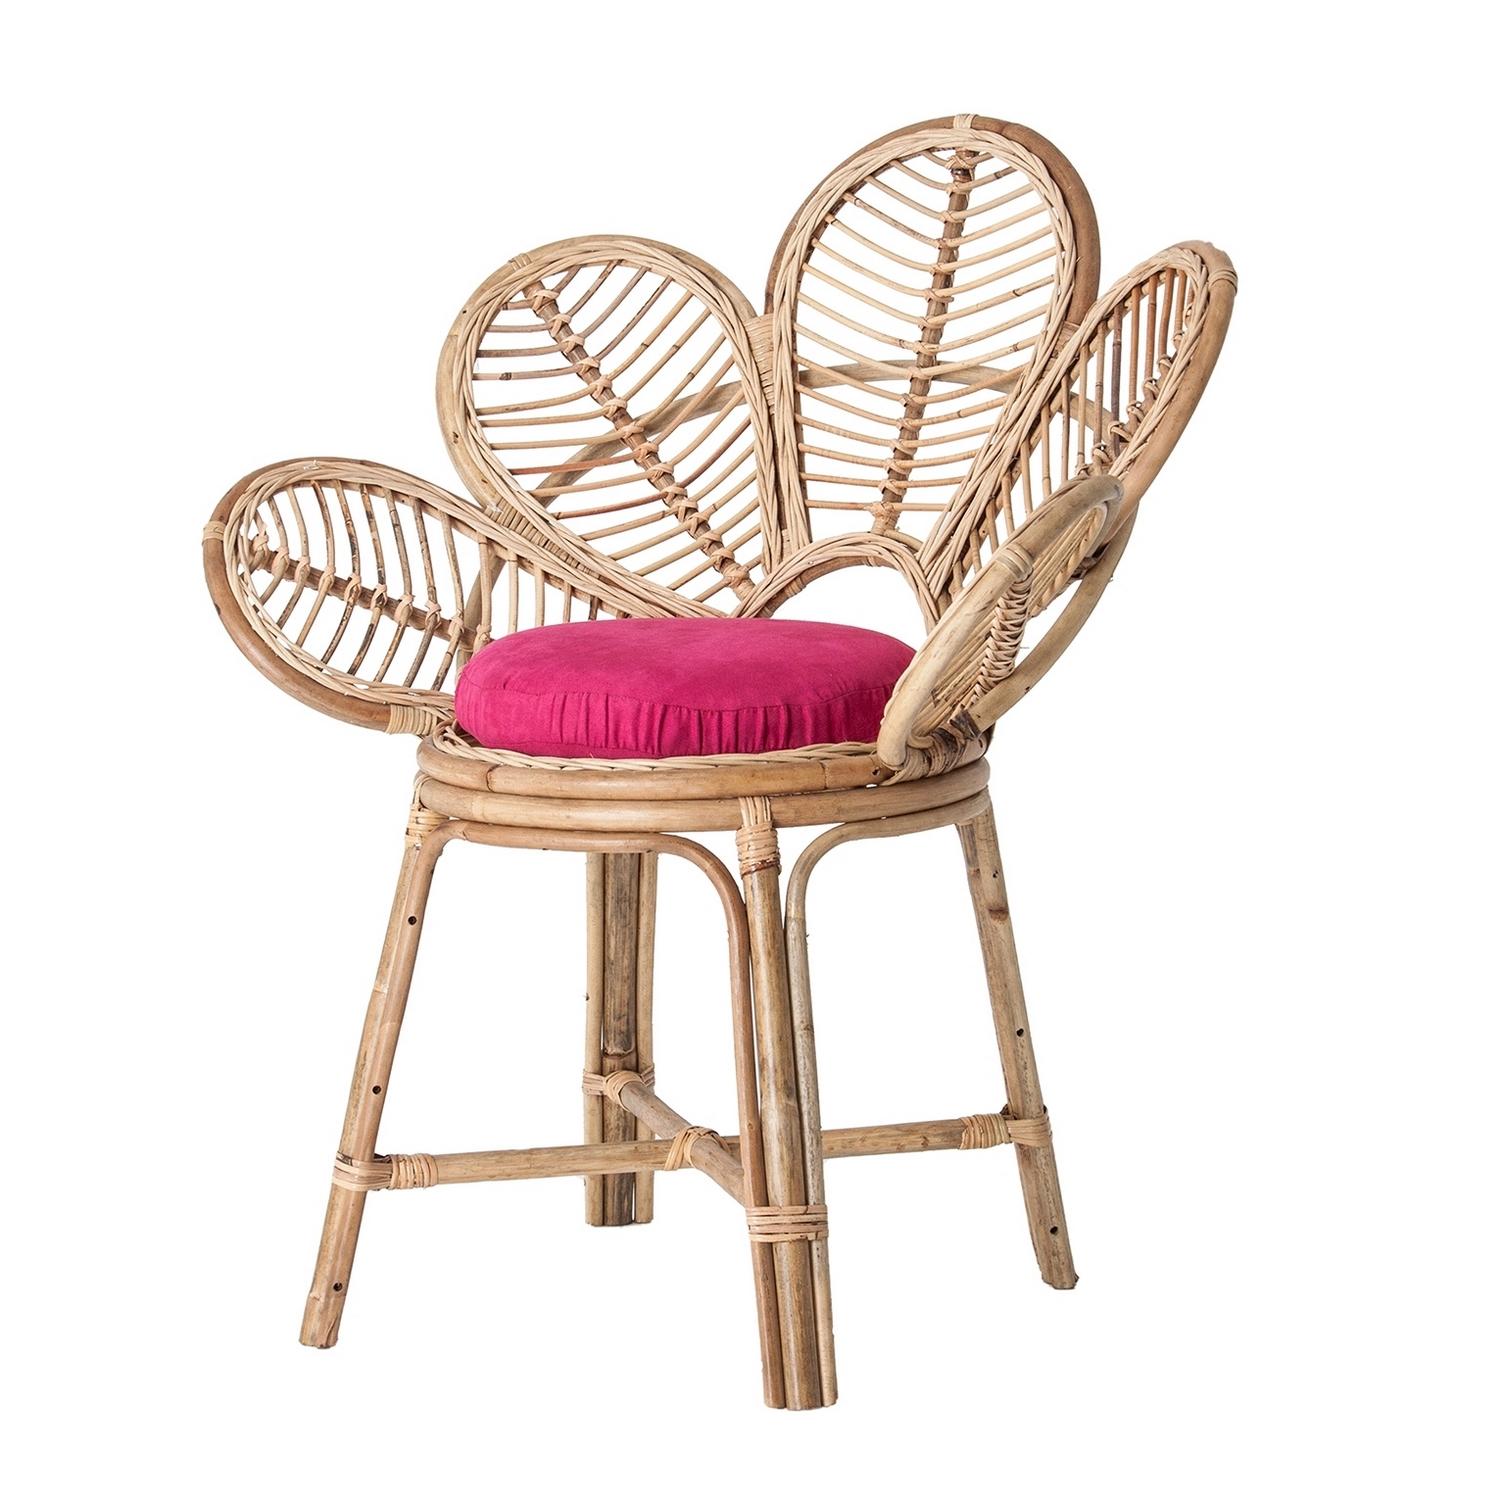 Mid-Century Modern Rattan and Wicker Flower Shaped Chair For Sale